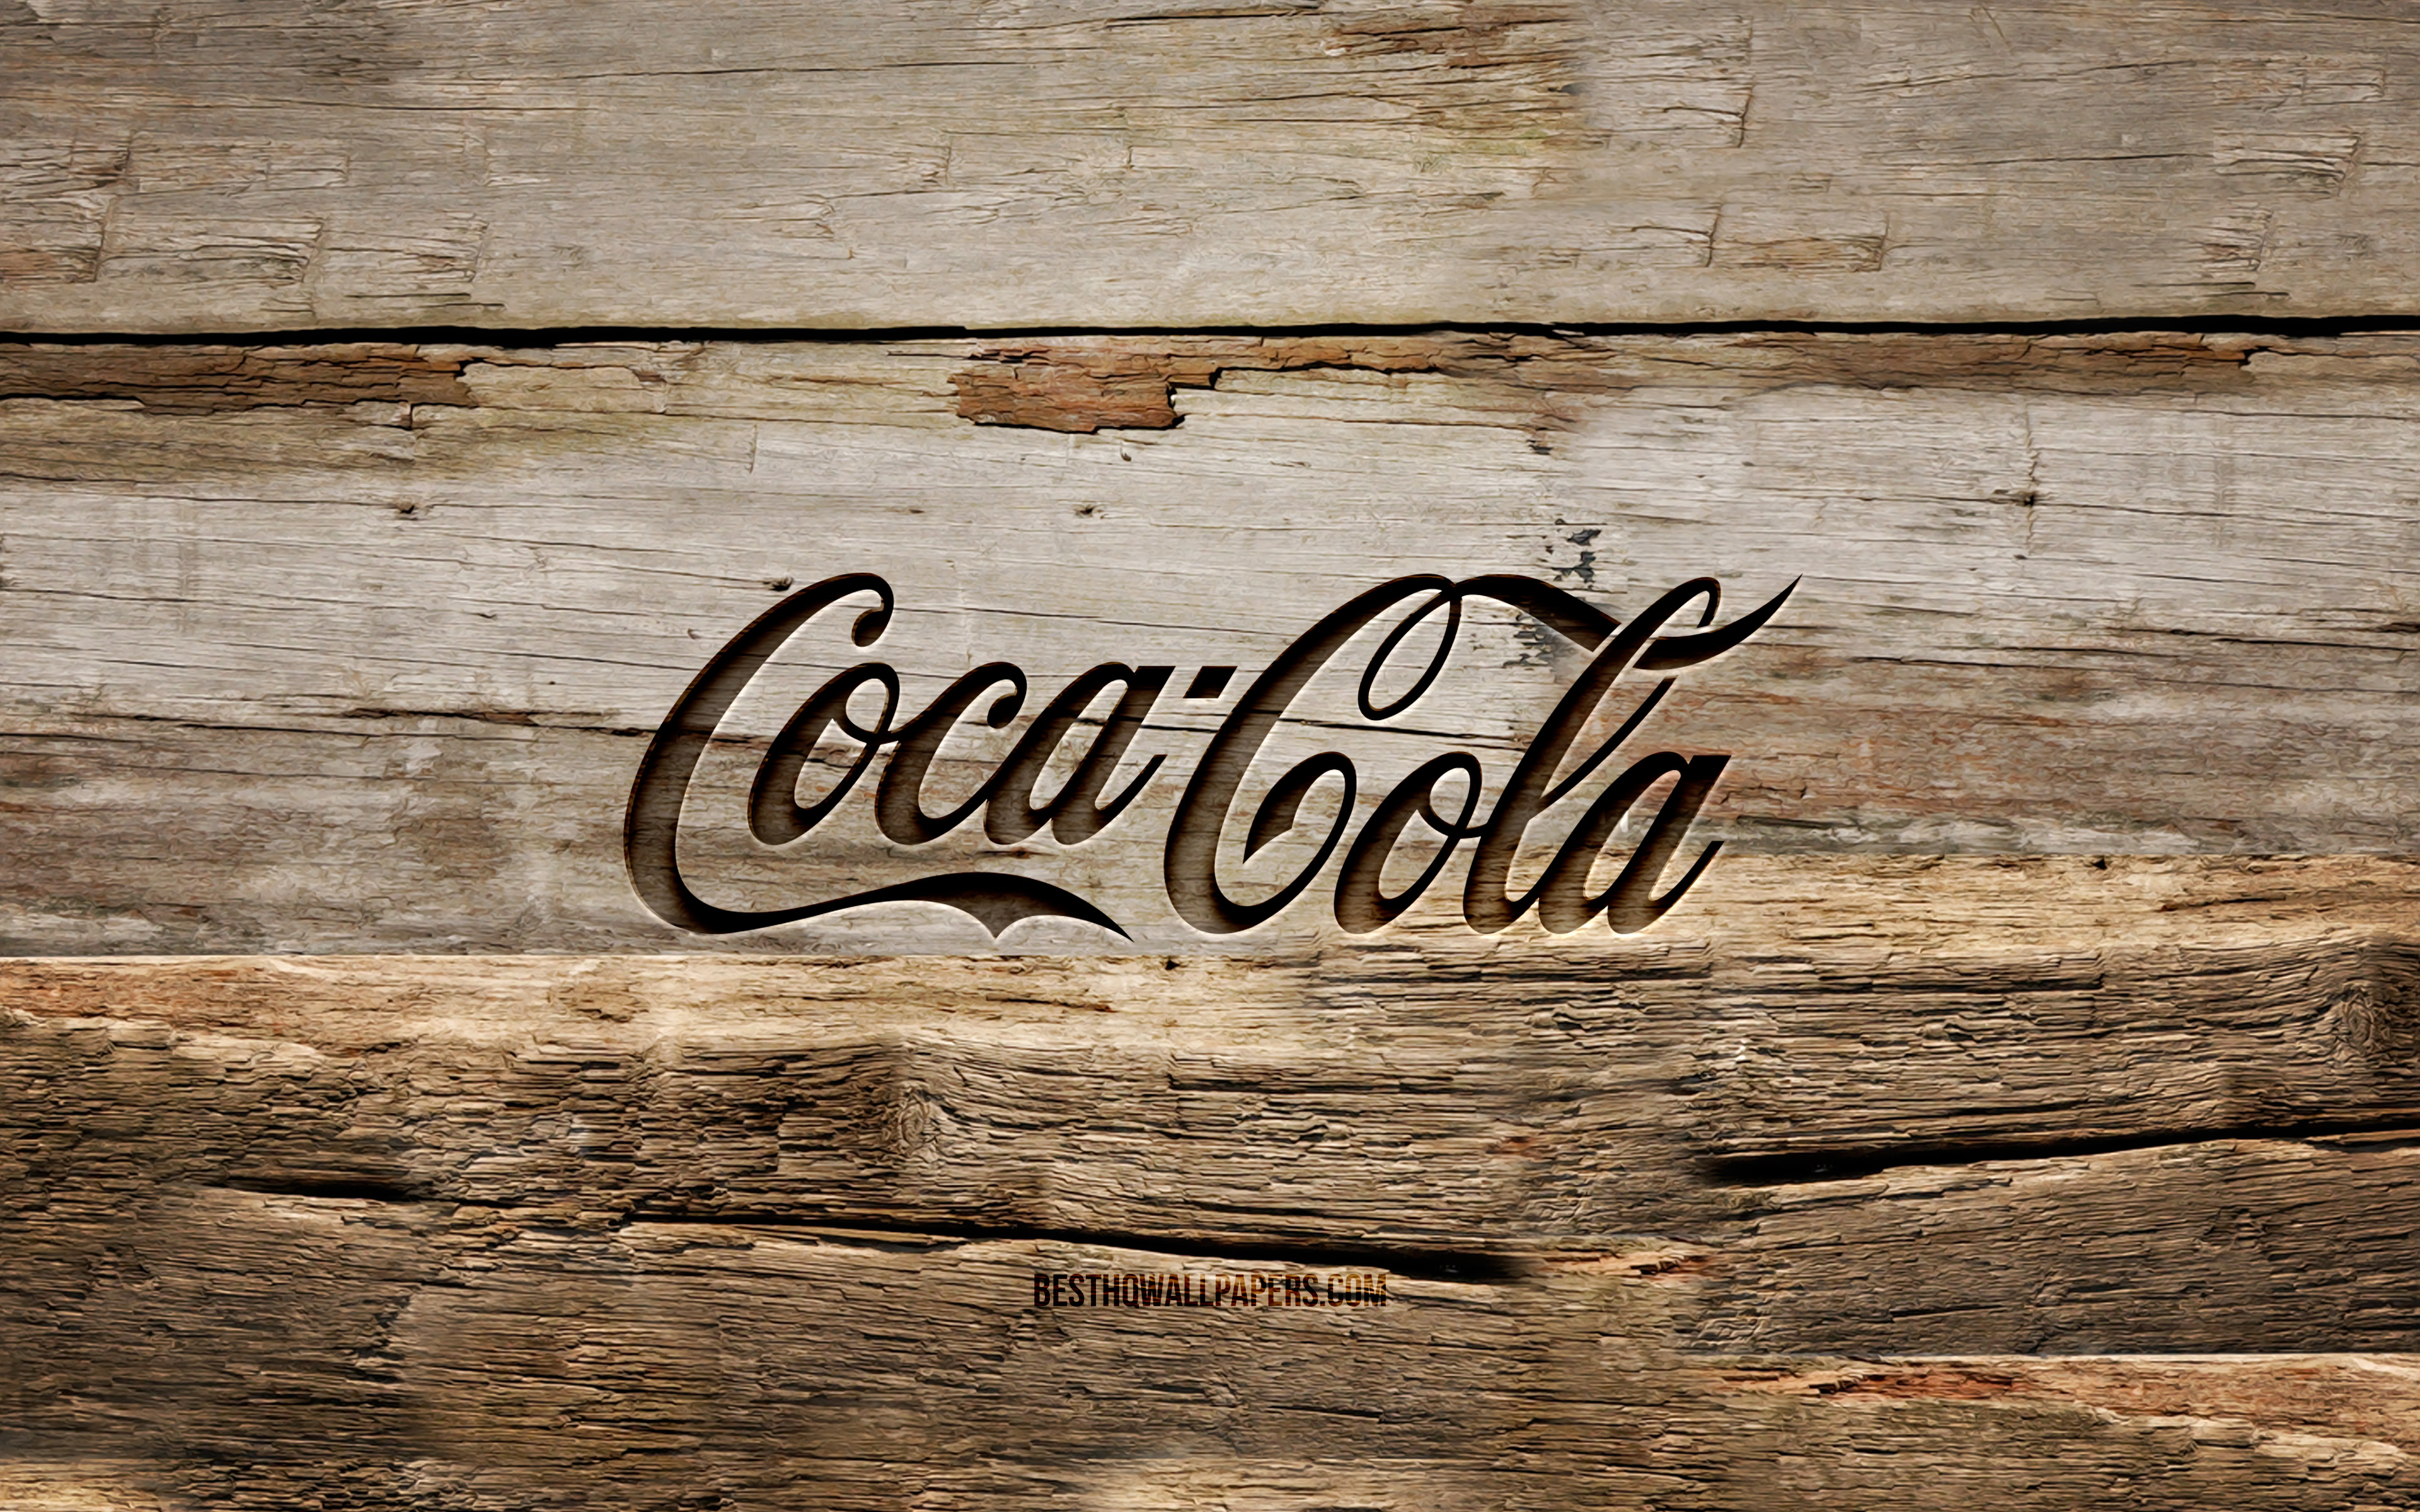 Download wallpapers Coca-Cola wooden logo, 4K, wooden backgrounds, brands,  Coca-Cola logo, creative, wood carving, Coca-Cola for desktop with  resolution 3840x2400. High Quality HD pictures wallpapers